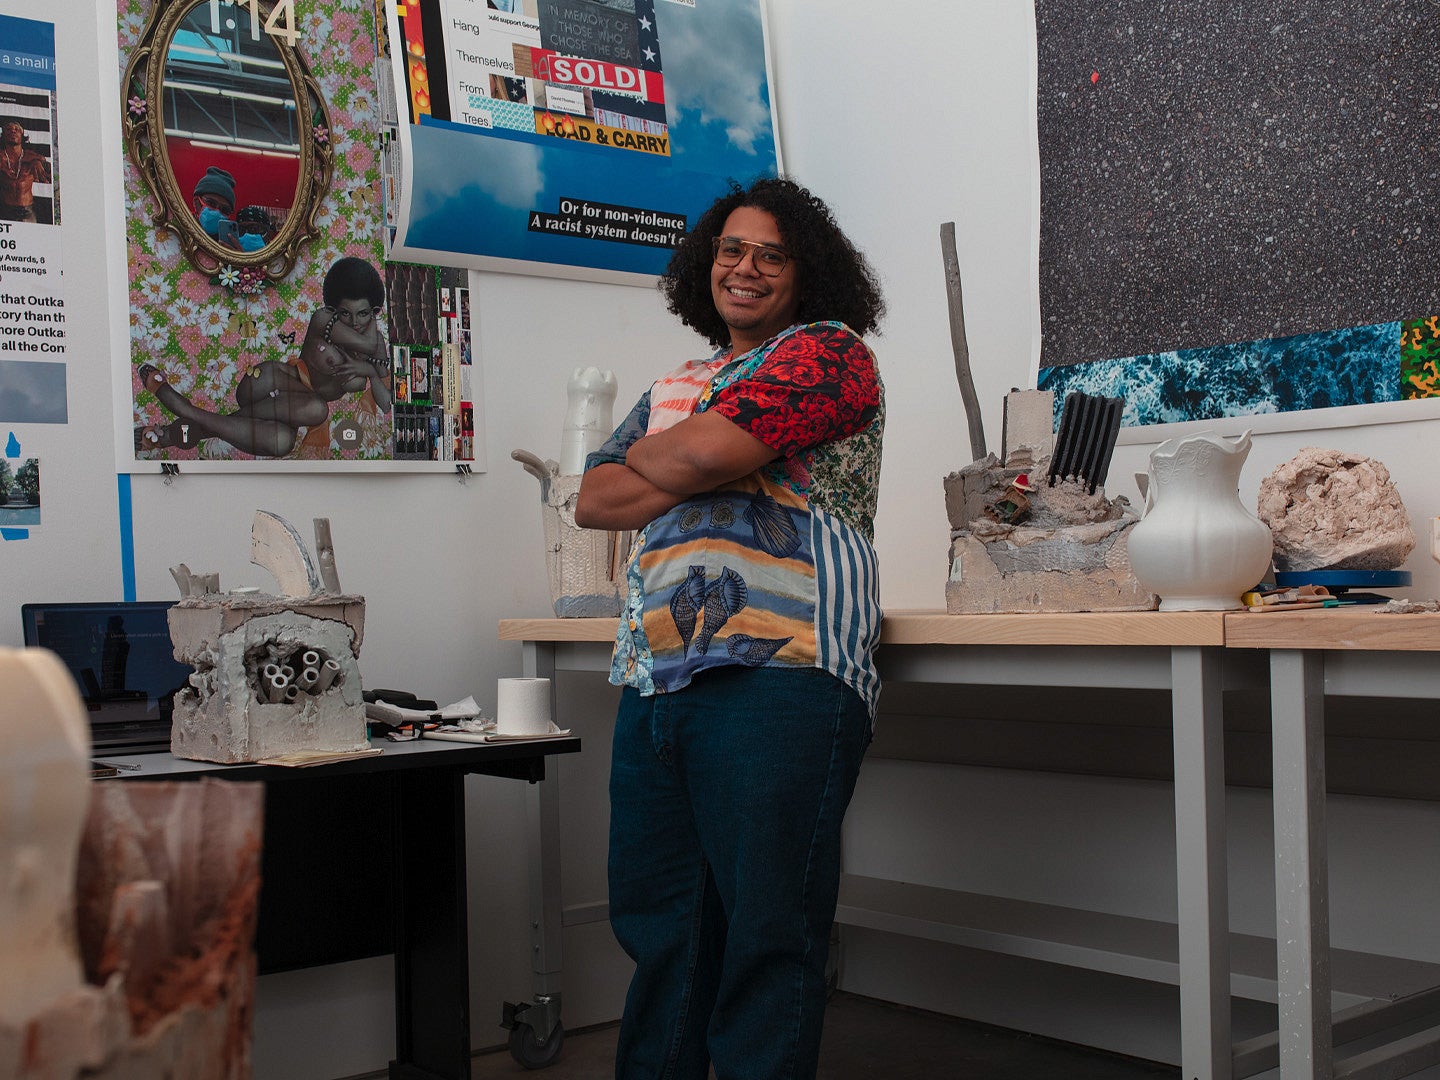 Photograph of artist, Kahlil Robert Irving. Photo shows a smiling person with neck length hair and a colorful shirt posing in an artist studio with pieces and other artworks on display. 